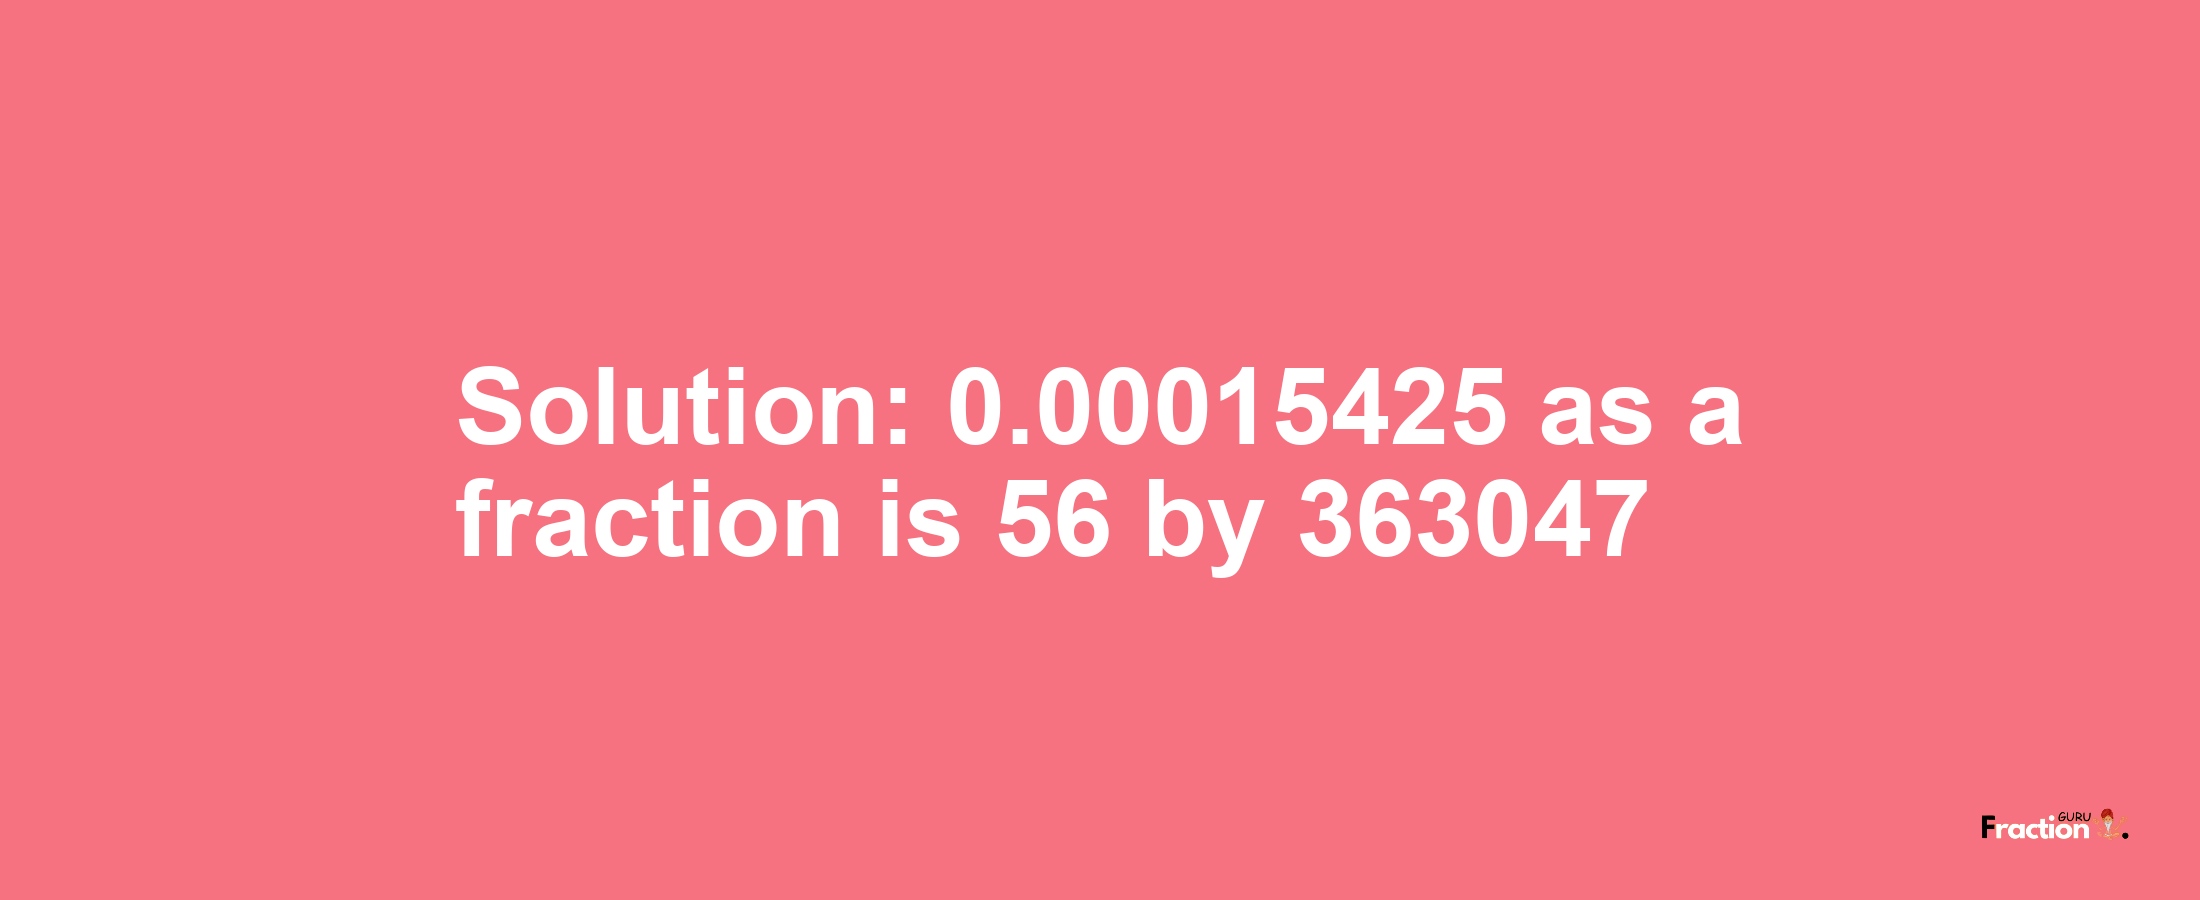 Solution:0.00015425 as a fraction is 56/363047